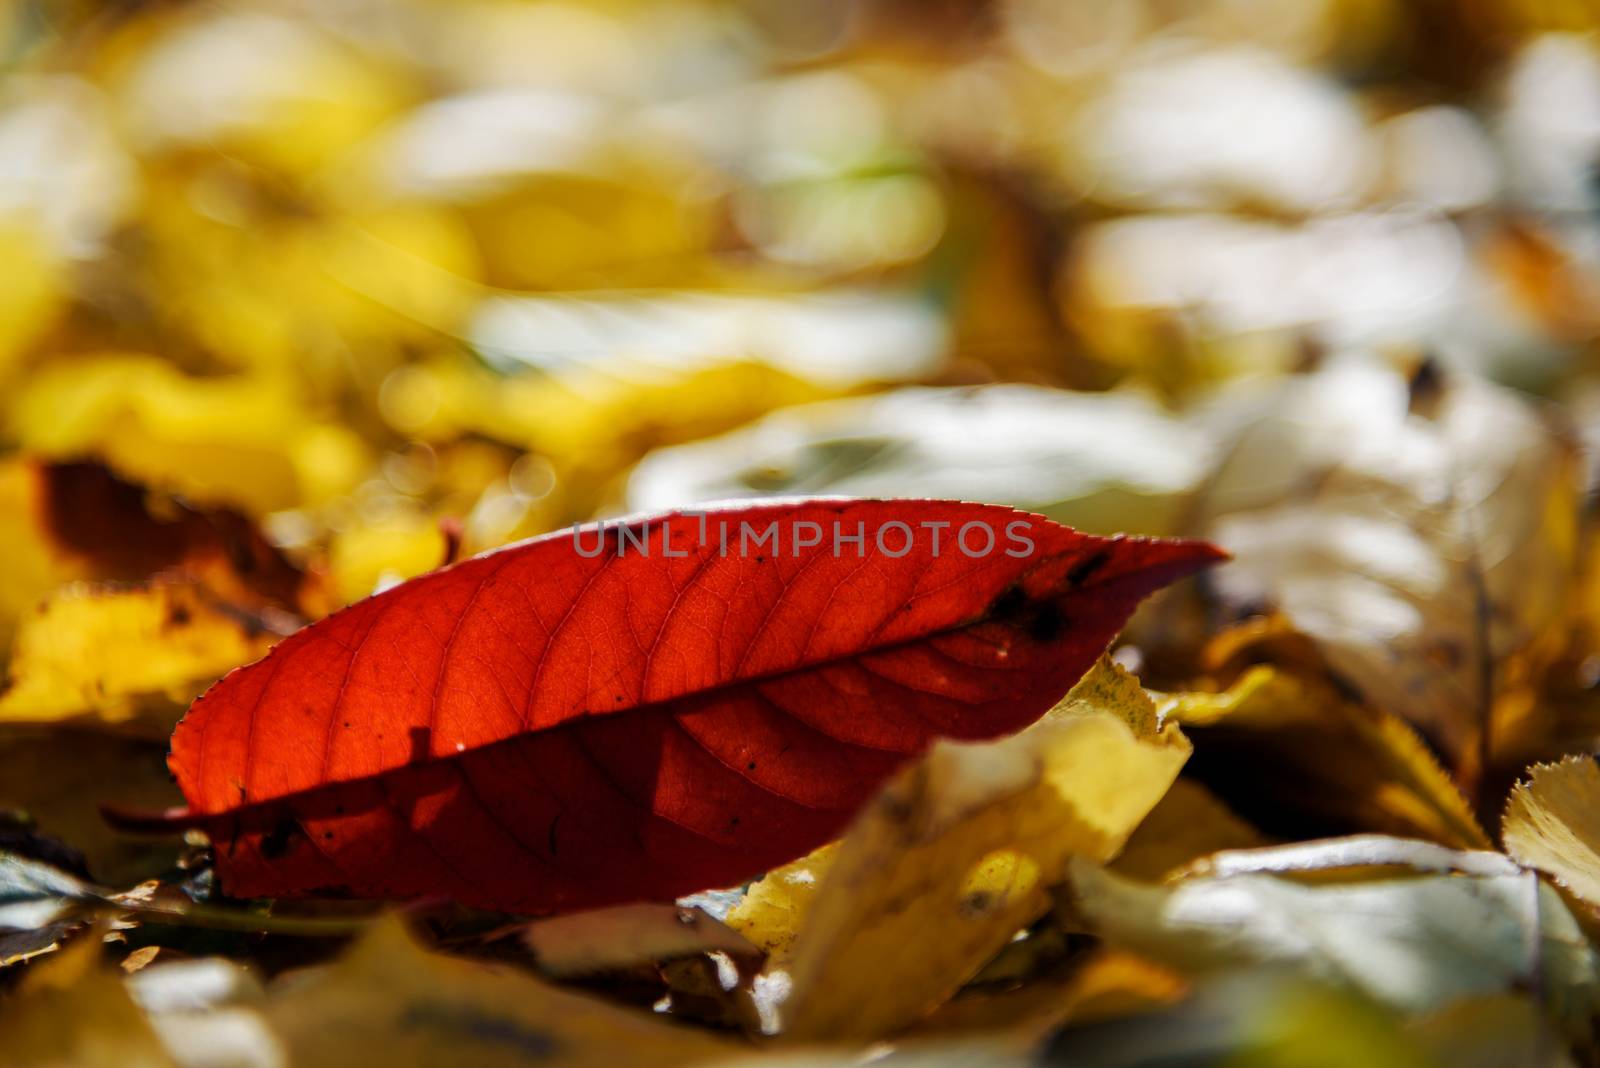 Red peach leaf on yellow autumn background